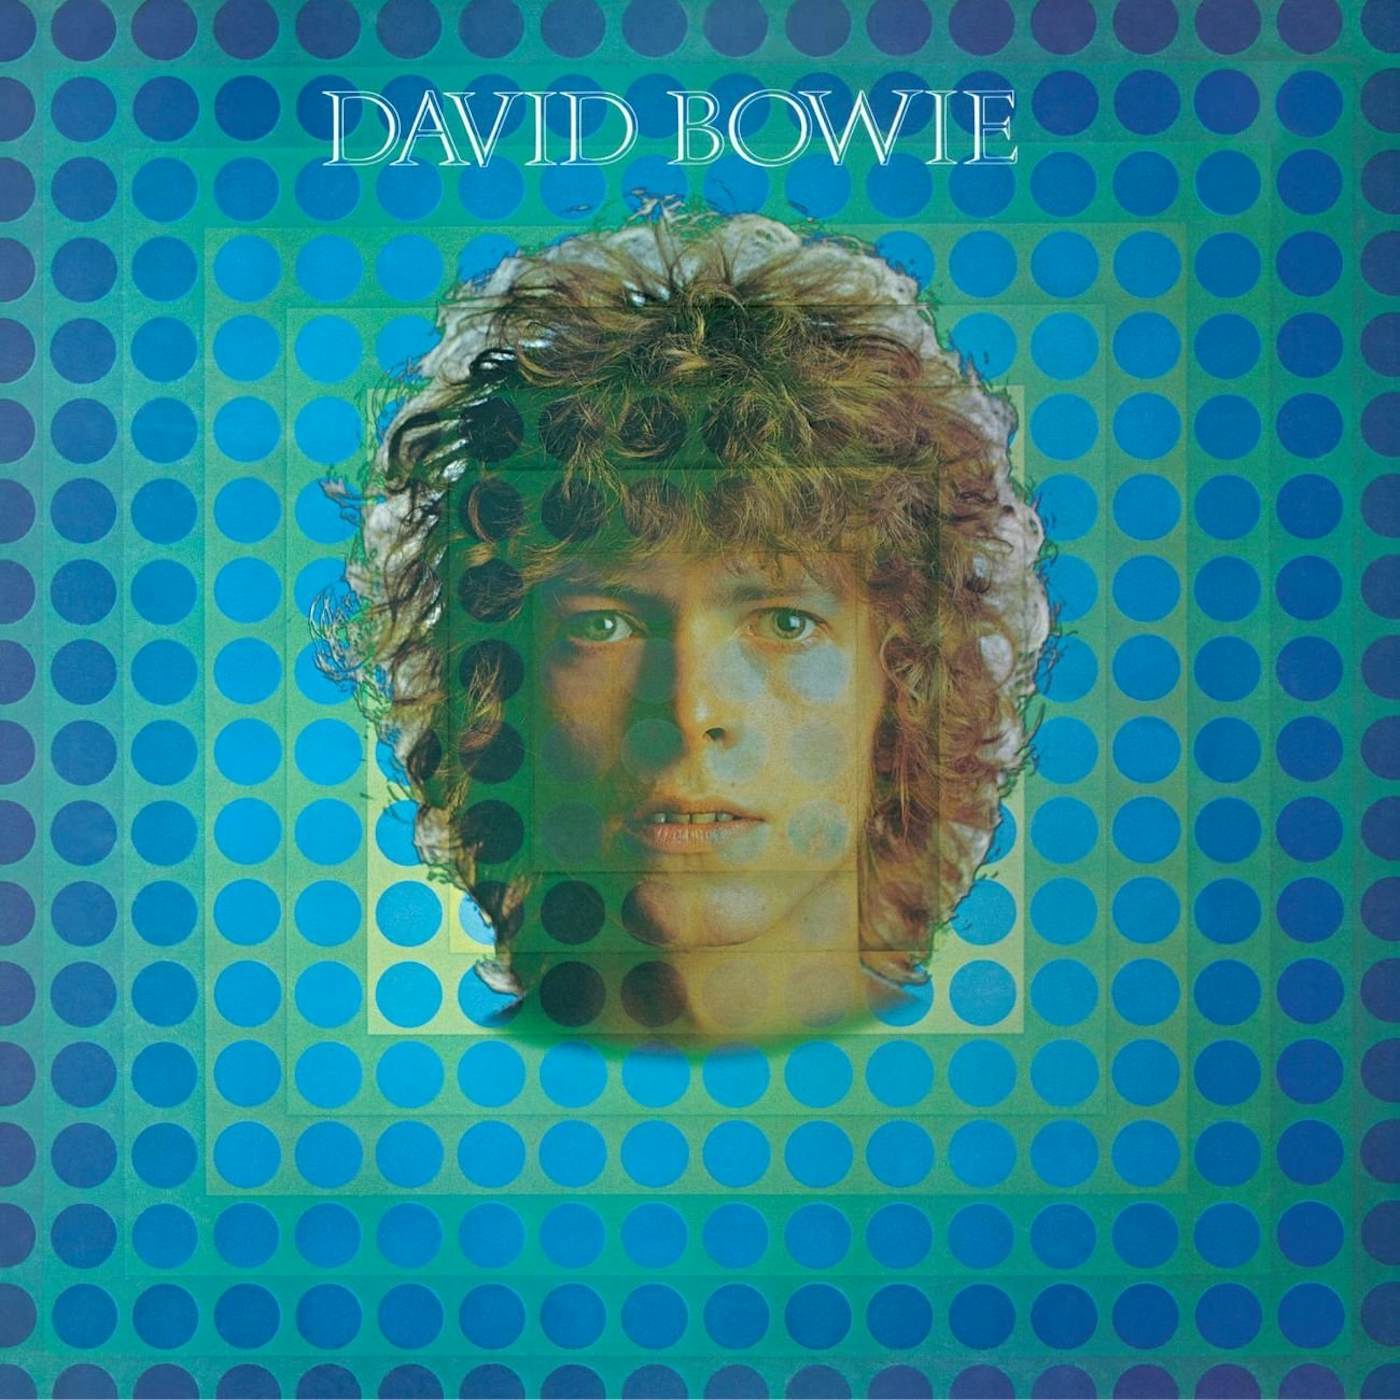 David Bowie SPACE ODDITY: 40TH ANNIVERSARY Vinyl Record - Remastered, Special Edition